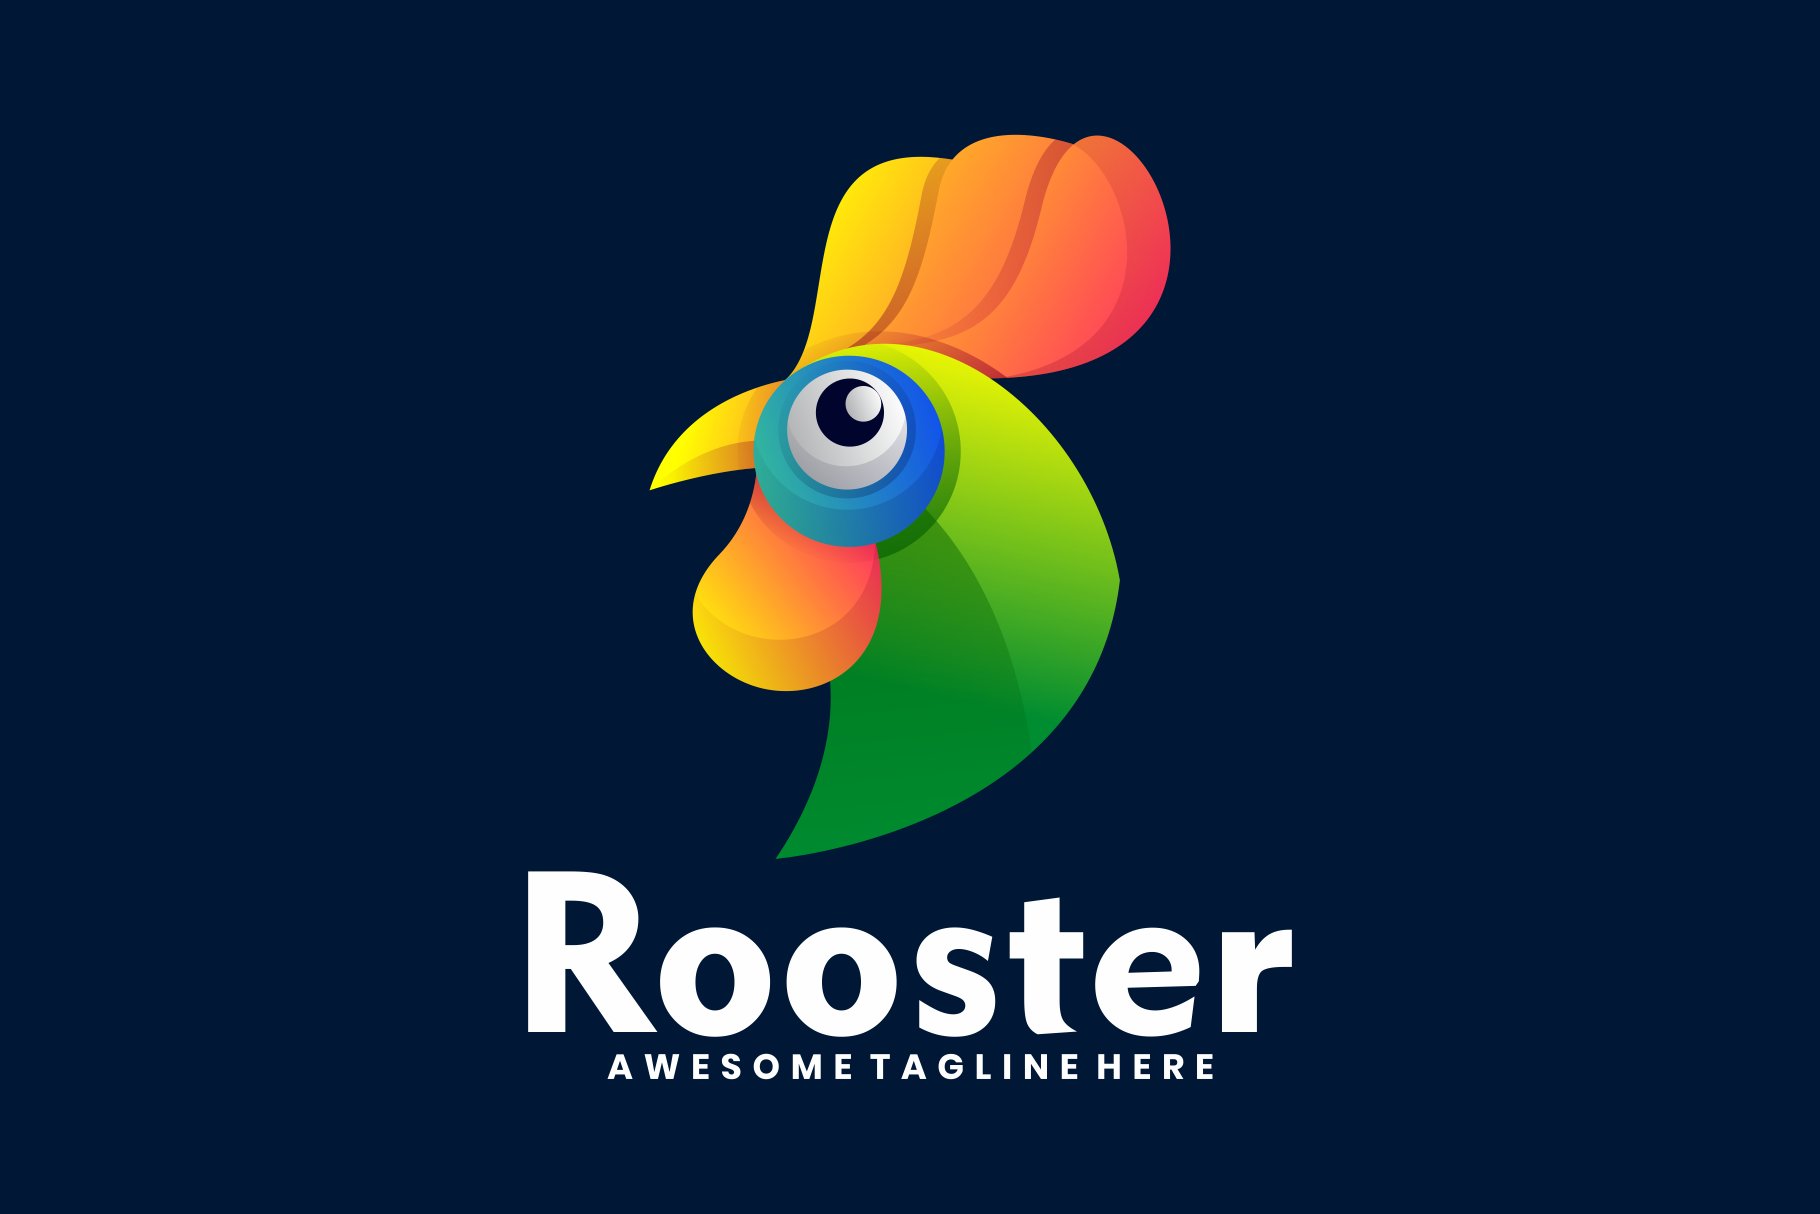 Rooster Gradient Colorful Style cover image.